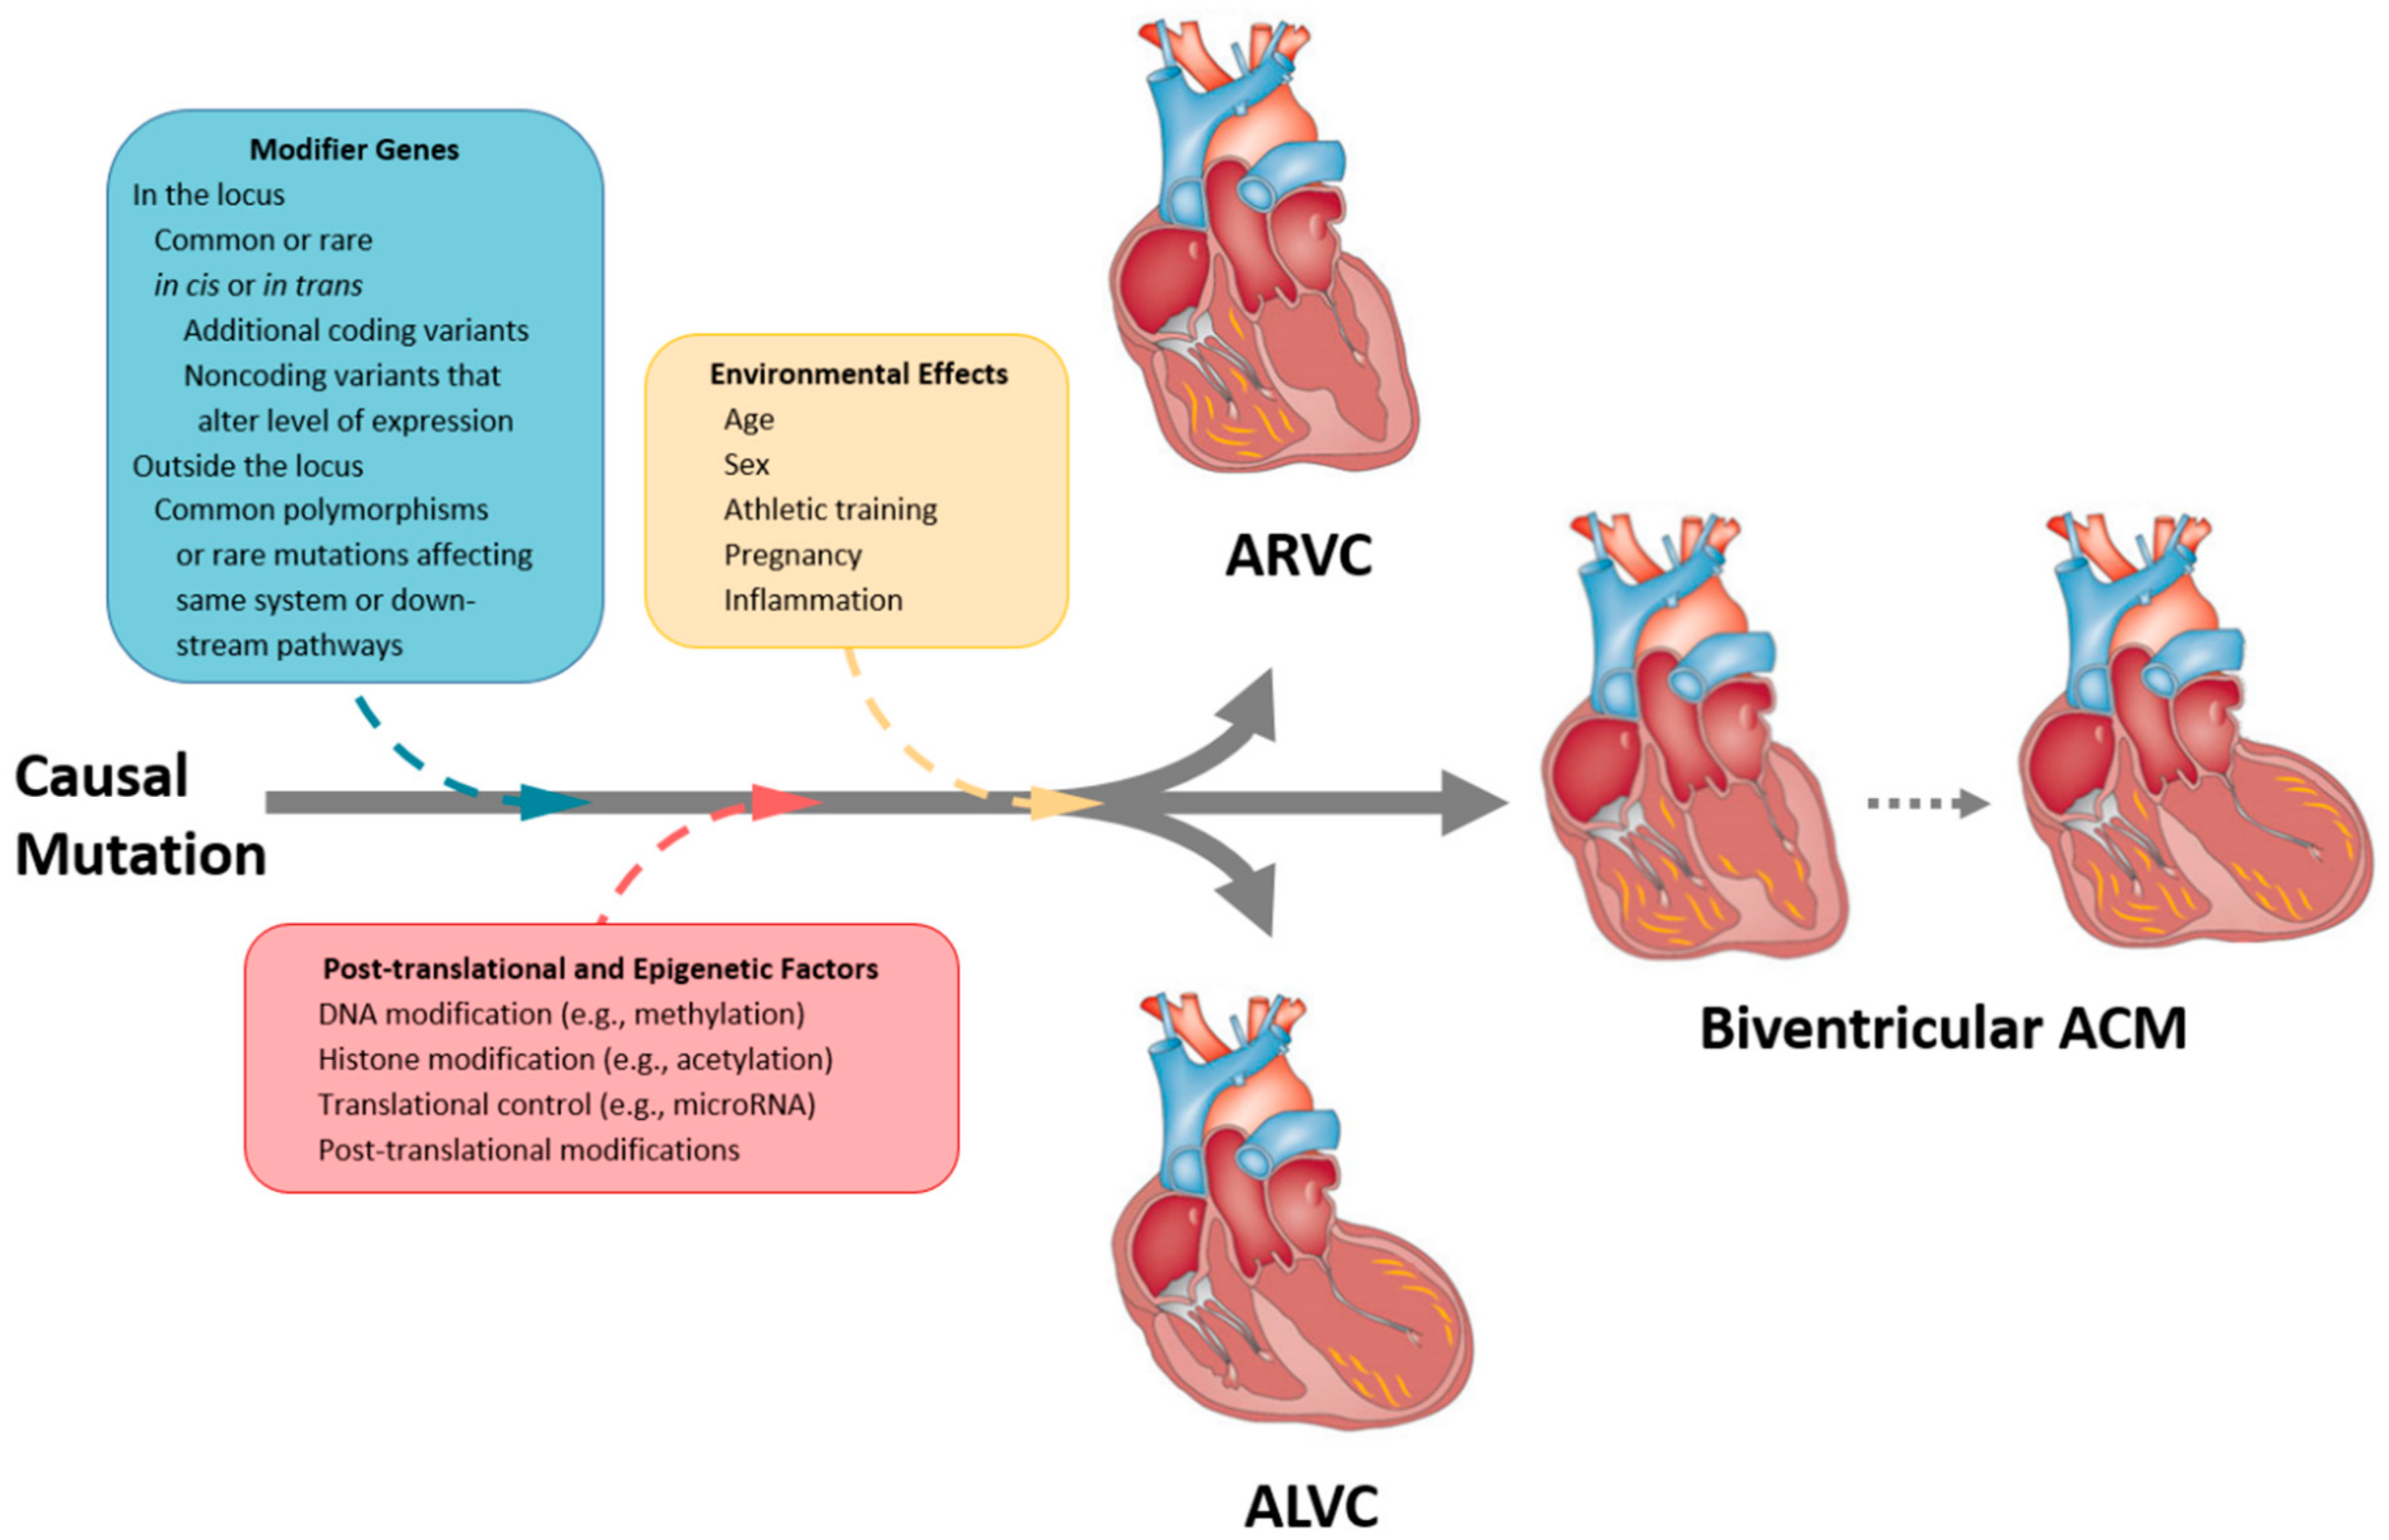 Left Ventricular Dysfunction in Arrhythmogenic Cardiomyopathy: Association  With Exercise Exposure, Genetic Basis, and Prognosis